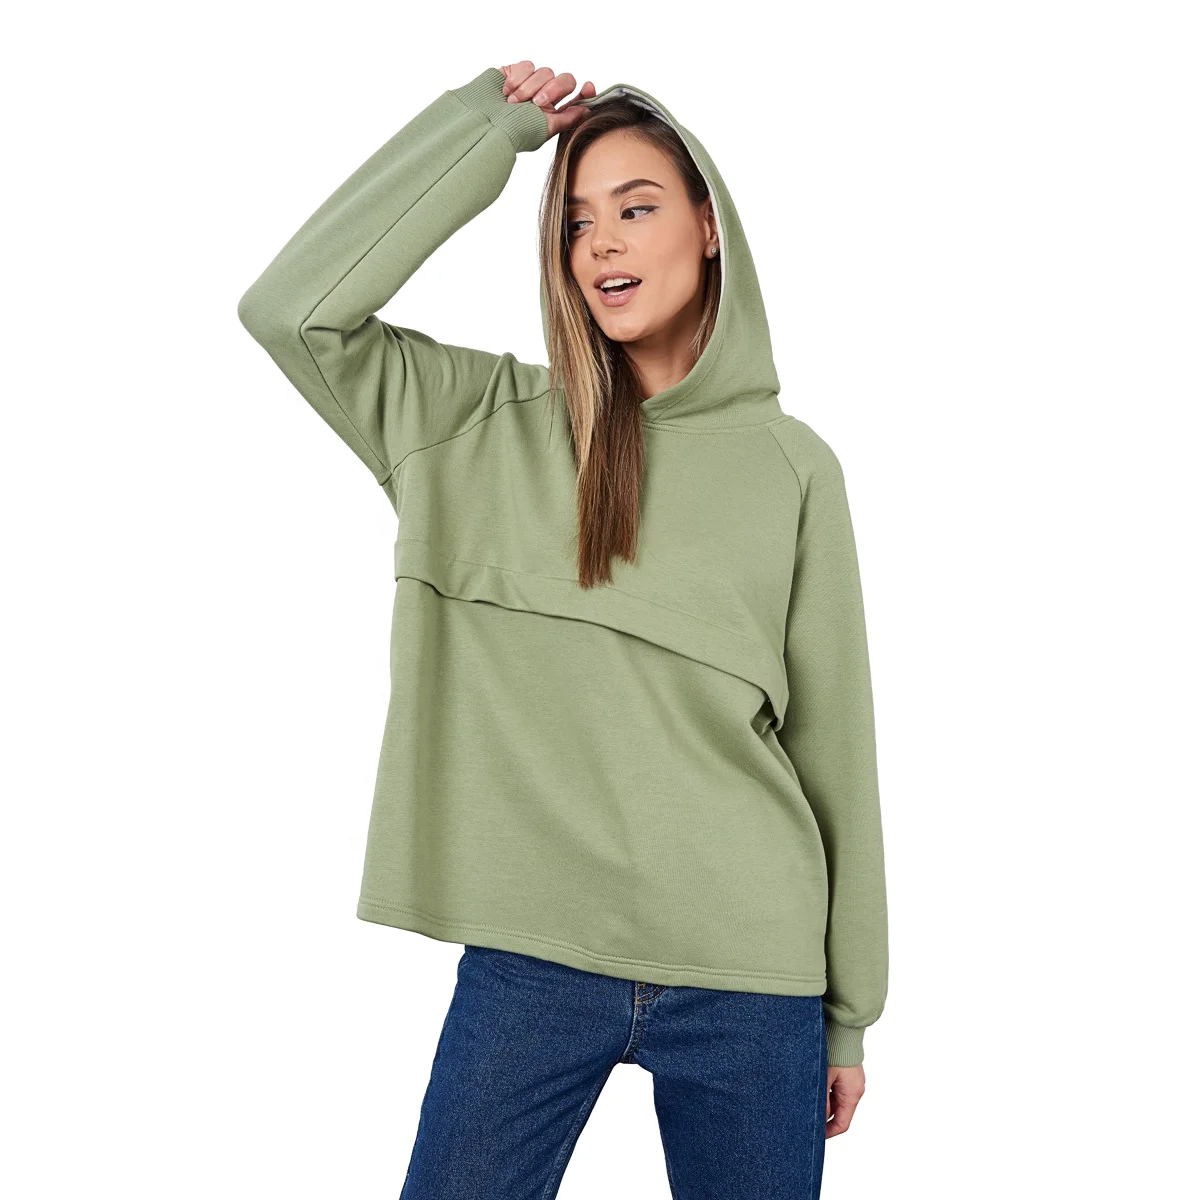 Oversize Pocketless Hoodie for Pregnant Women Maternity Clothes for All Seasons